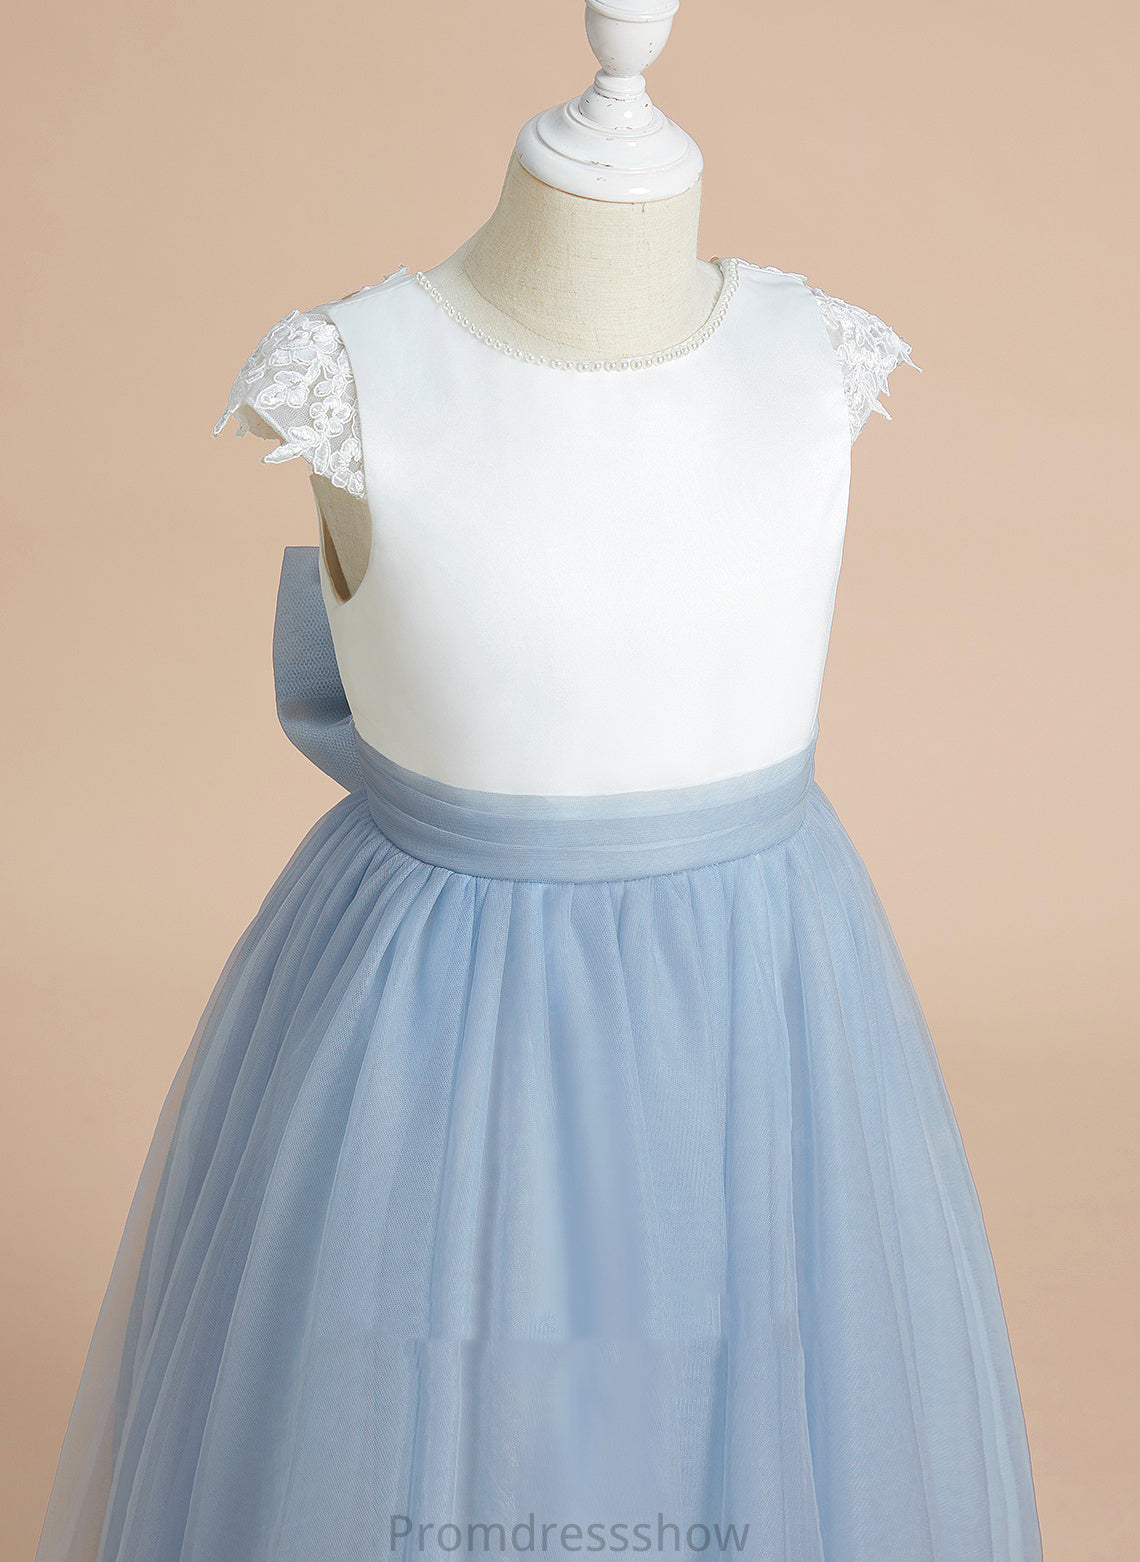 Flower Girl Dresses - Sage Flower Lace/Bow(s) Neck Scoop A-Line Satin/Tulle Girl Dress Sleeveless Tea-length With